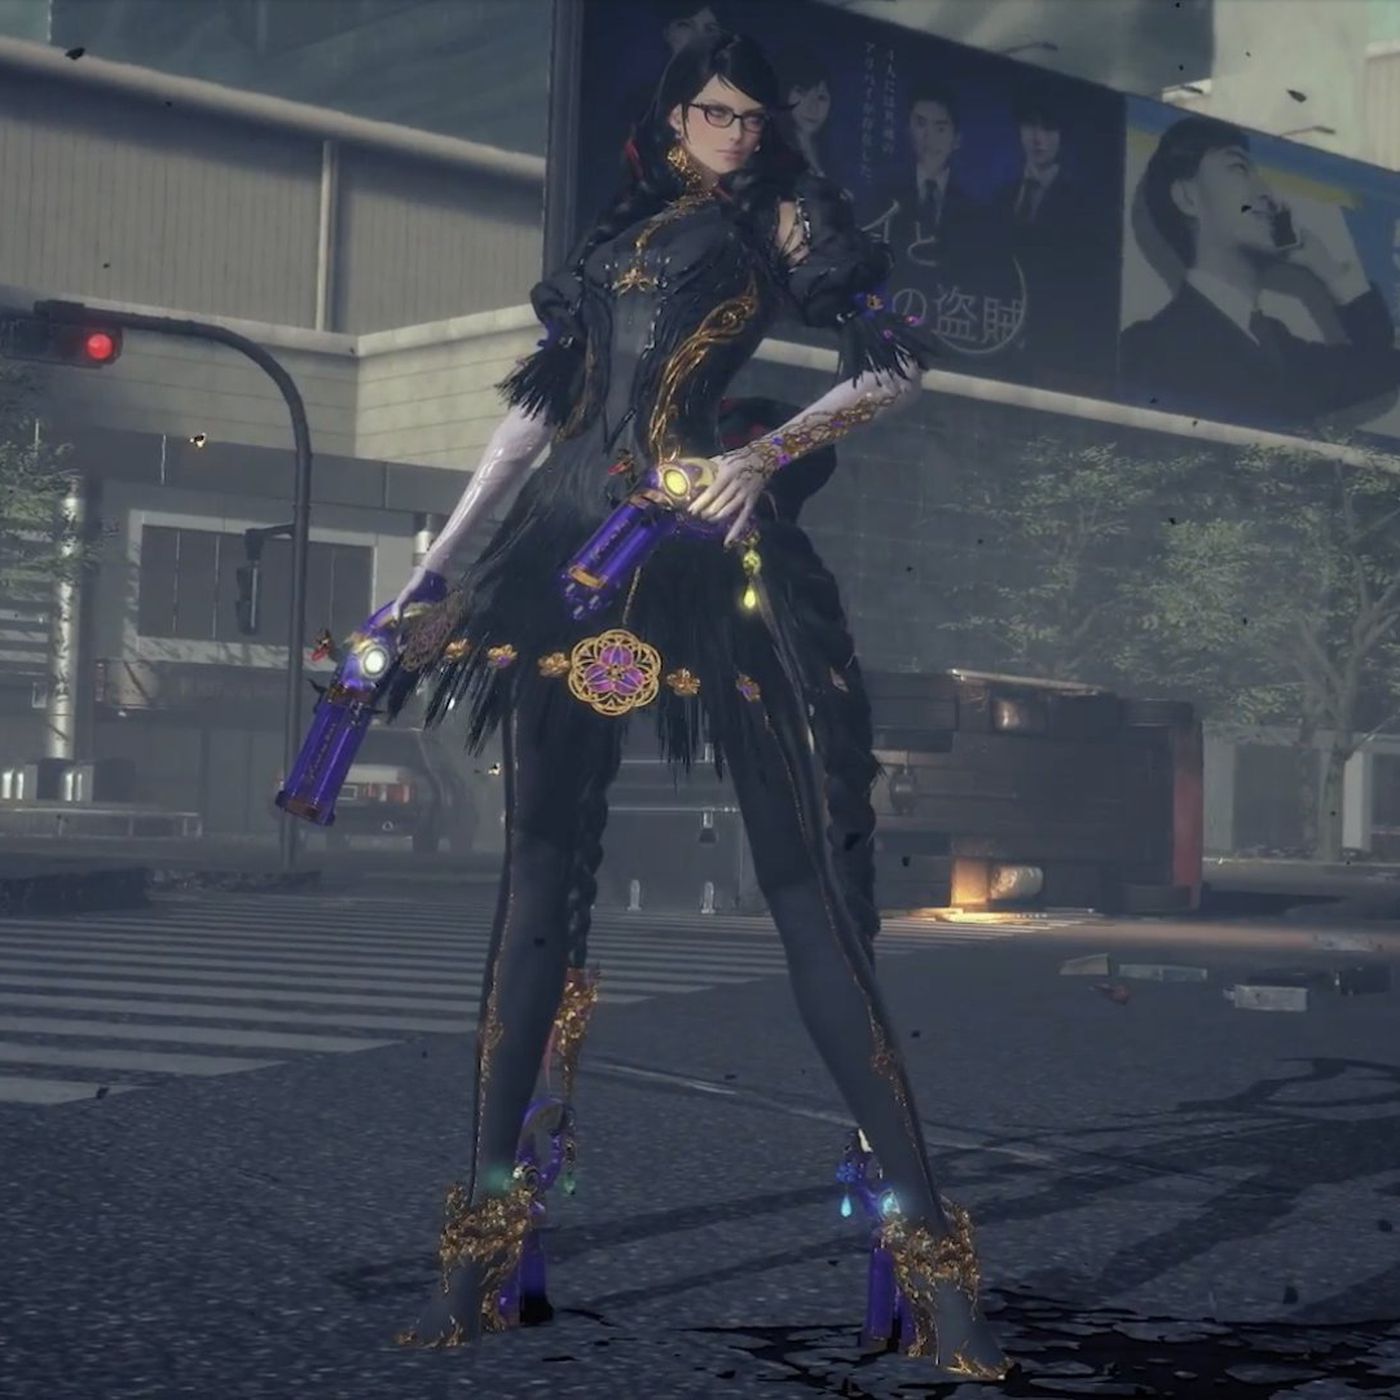 Bayonetta is an action-adventure hack and slash video game developed by PlatinumGames and published by Sega. The game was originally released for Xbox 360 and PlayStation 3 in Japan in October 2009, and in North America and Europe in January 2010.